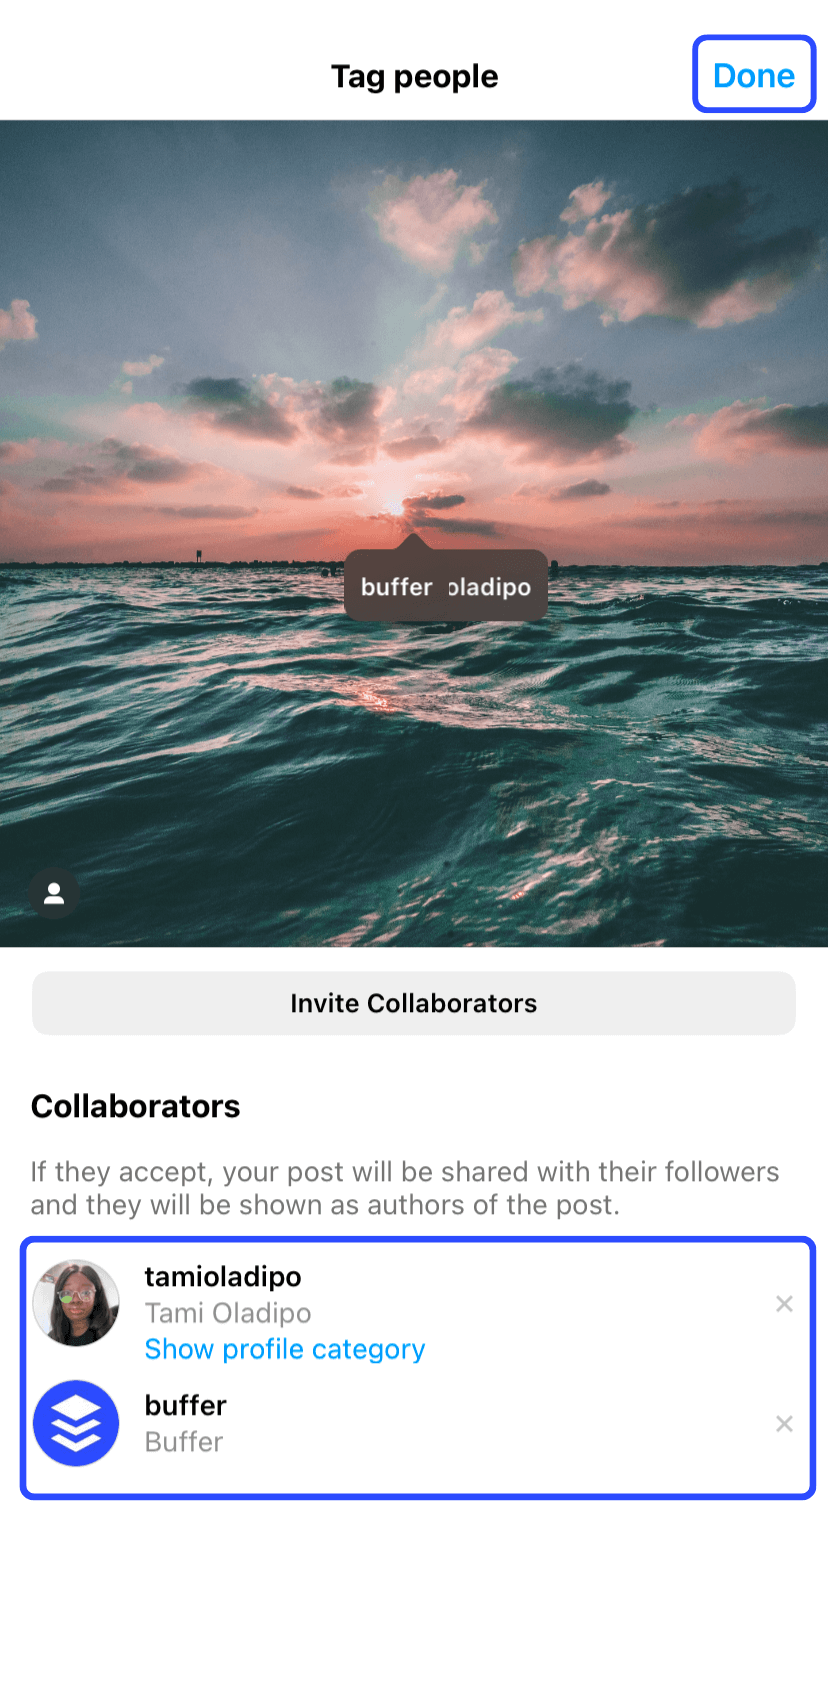 9 New Instagram Features and How to Use Them